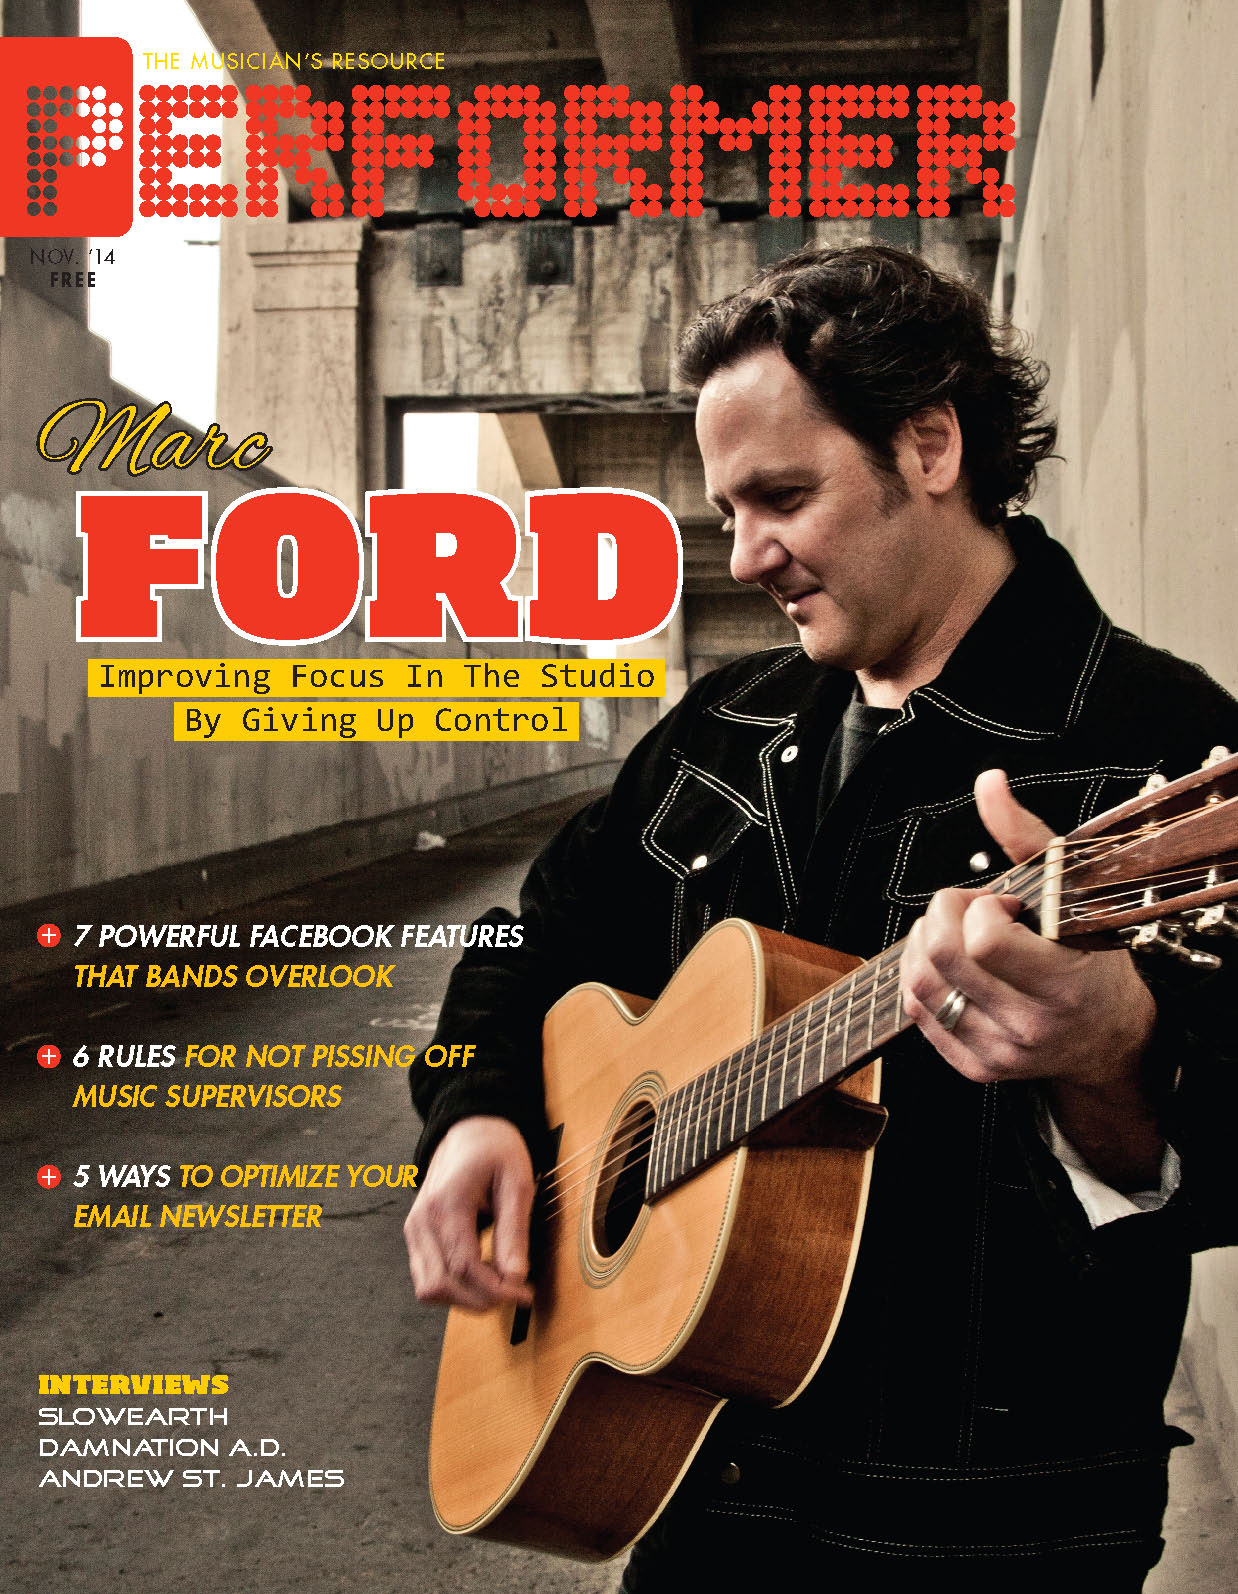 The November Issue Featuring Marc Ford Has Arrived!